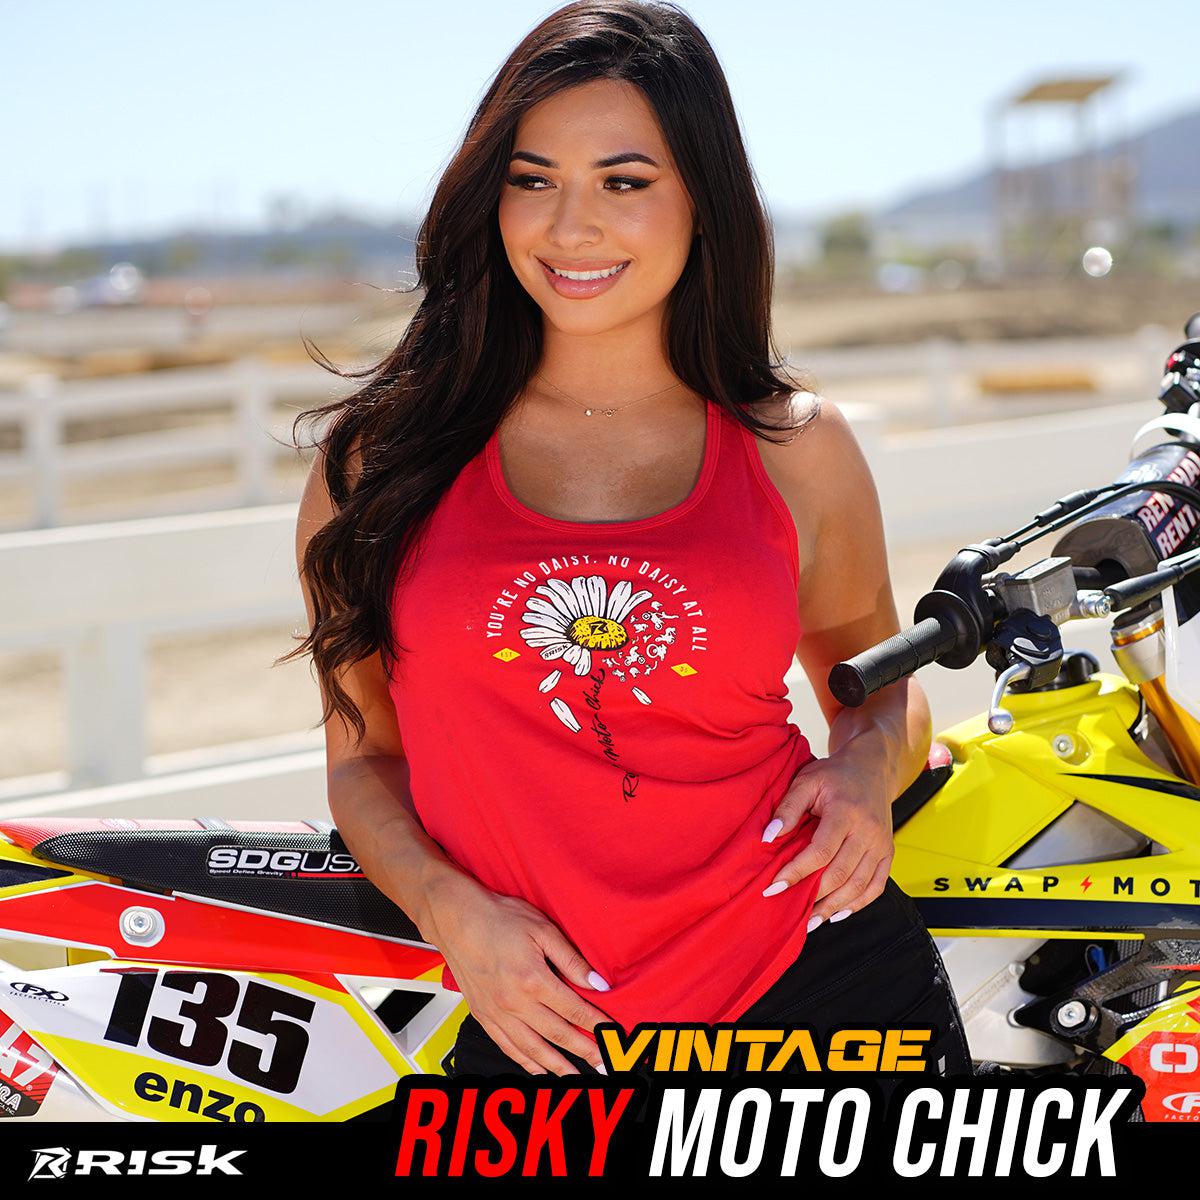 A Risky Moto Chick - Daisy - Distressed Graphic Red Women's Racerback Tank Top